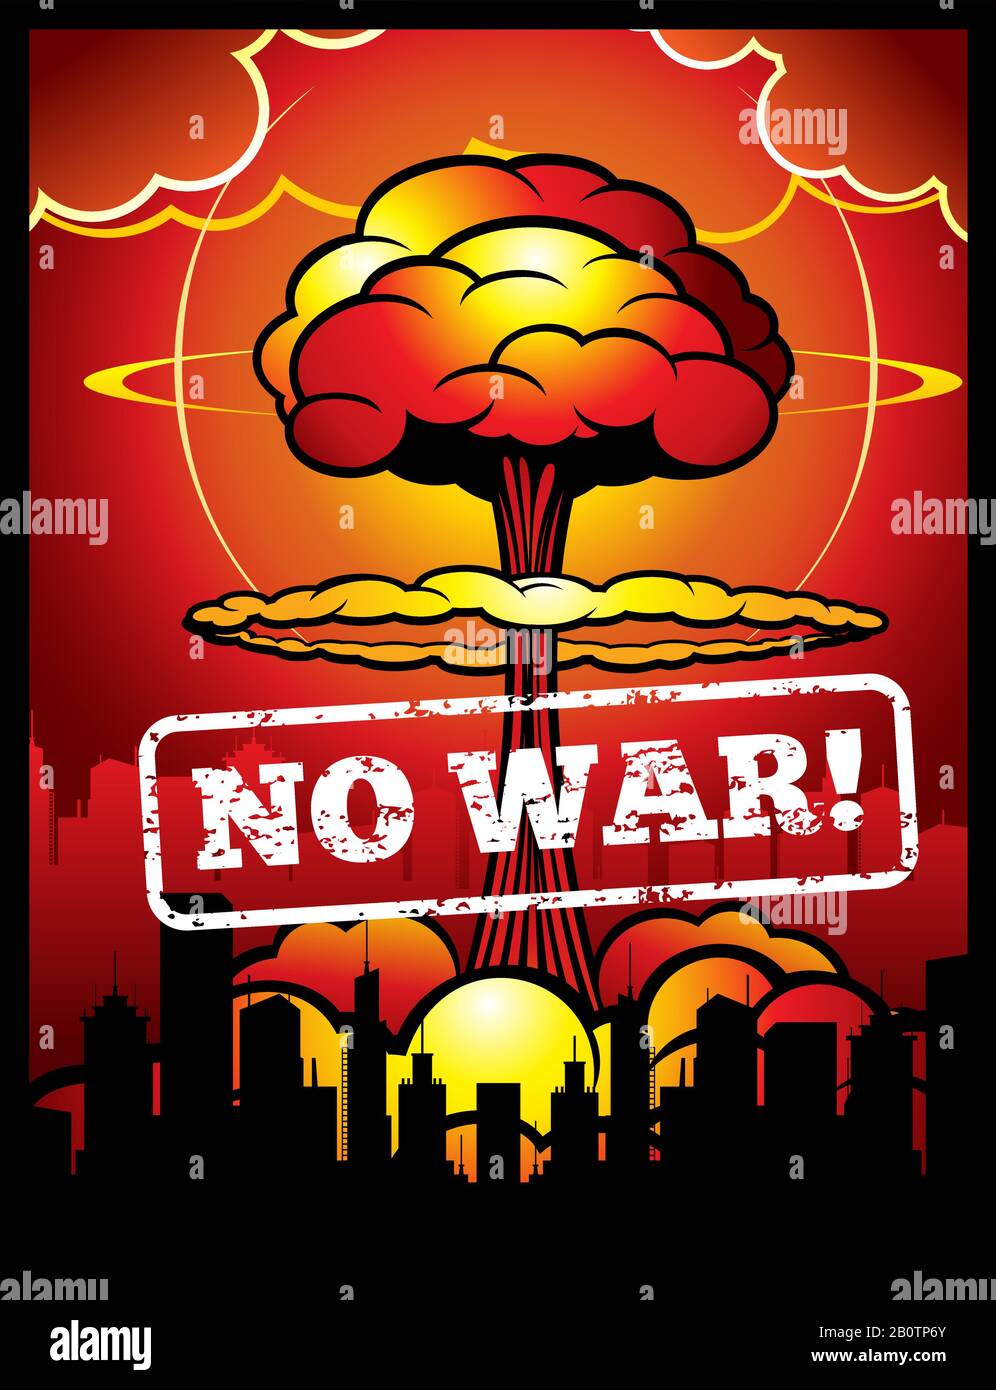 Vintage no war vector poster with explosion of atomic bomb and nuclear mushroom. World armageddon background with mushroom bomb nuclear illustration Stock Vector